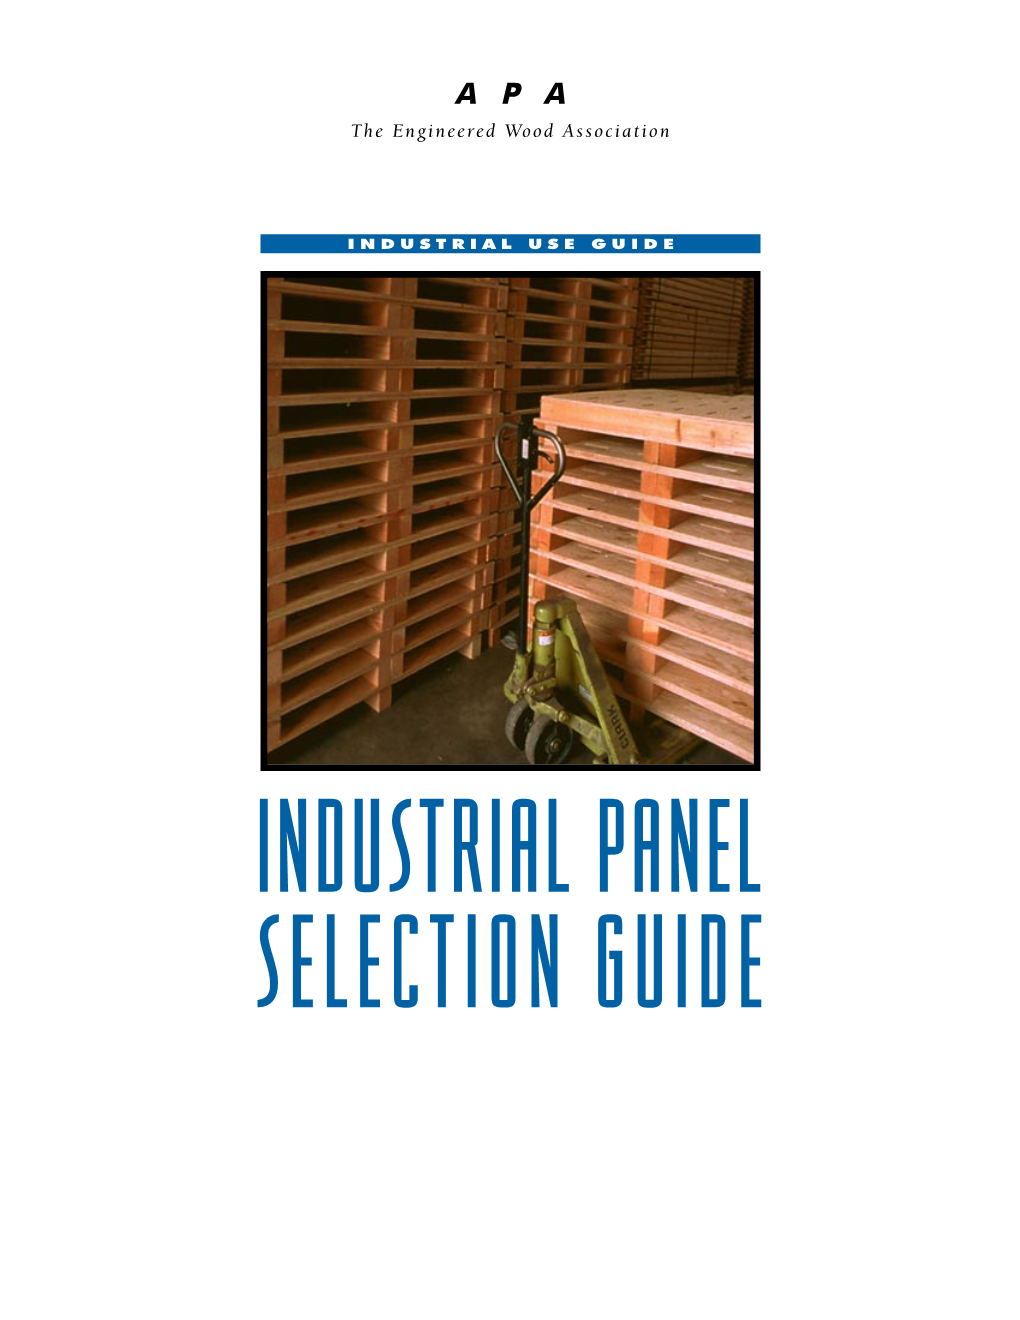 INDUSTRIAL PANEL SELECTION GUIDE GDE,T200,IPS.0 12/17/01 12:03 PM Page 2